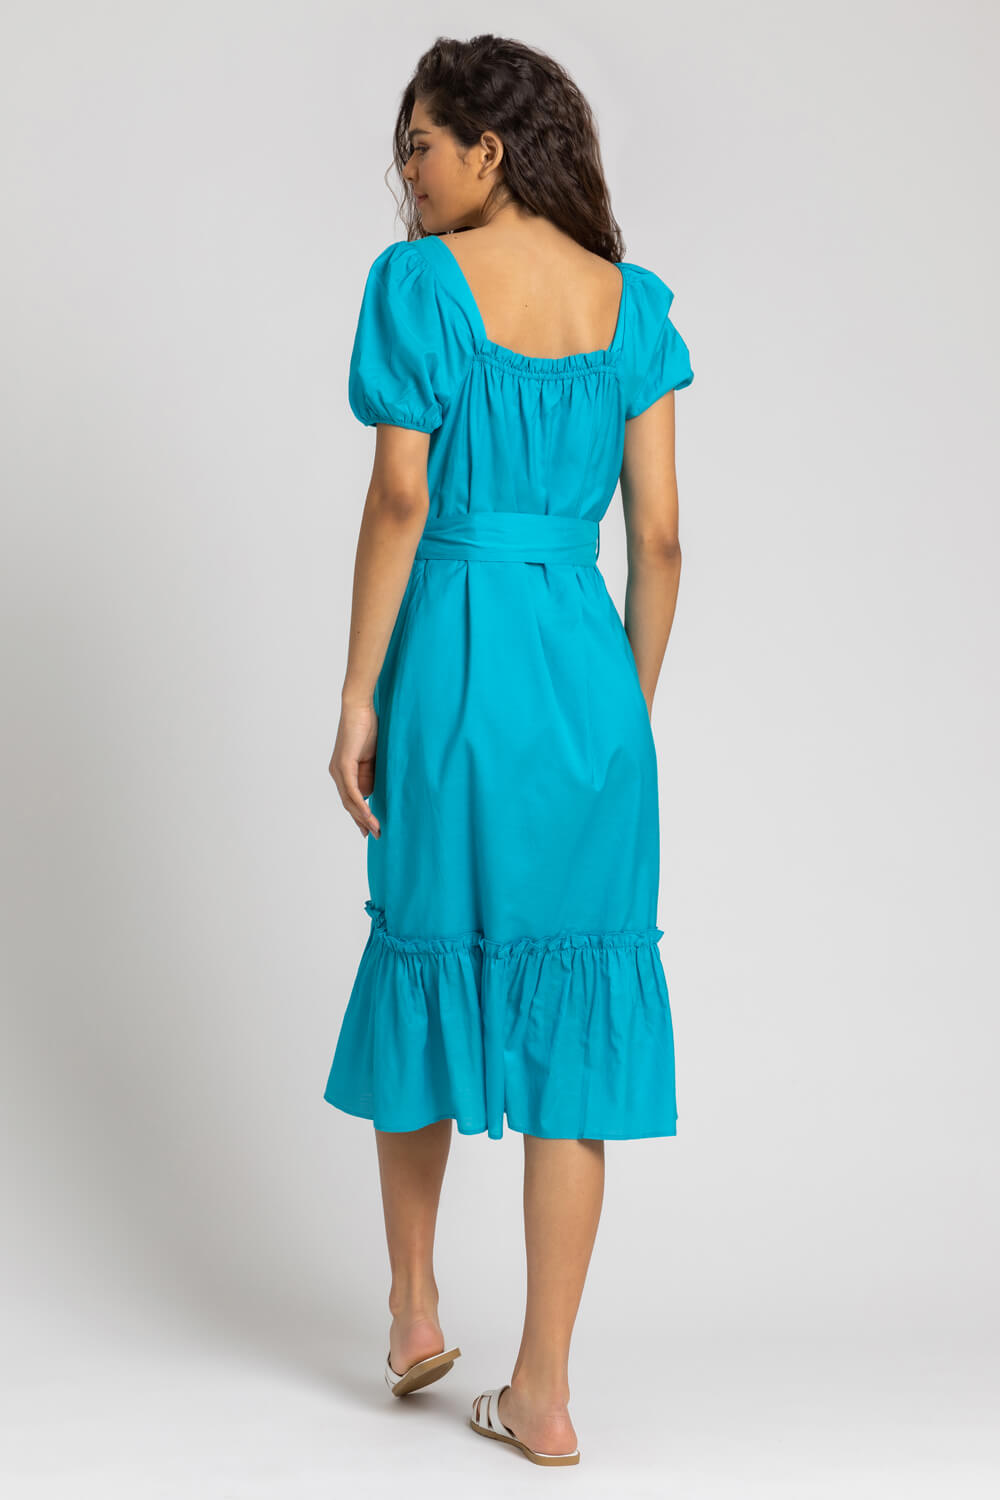 Turquoise Puff Sleeve Button Through Midi Dress, Image 2 of 5